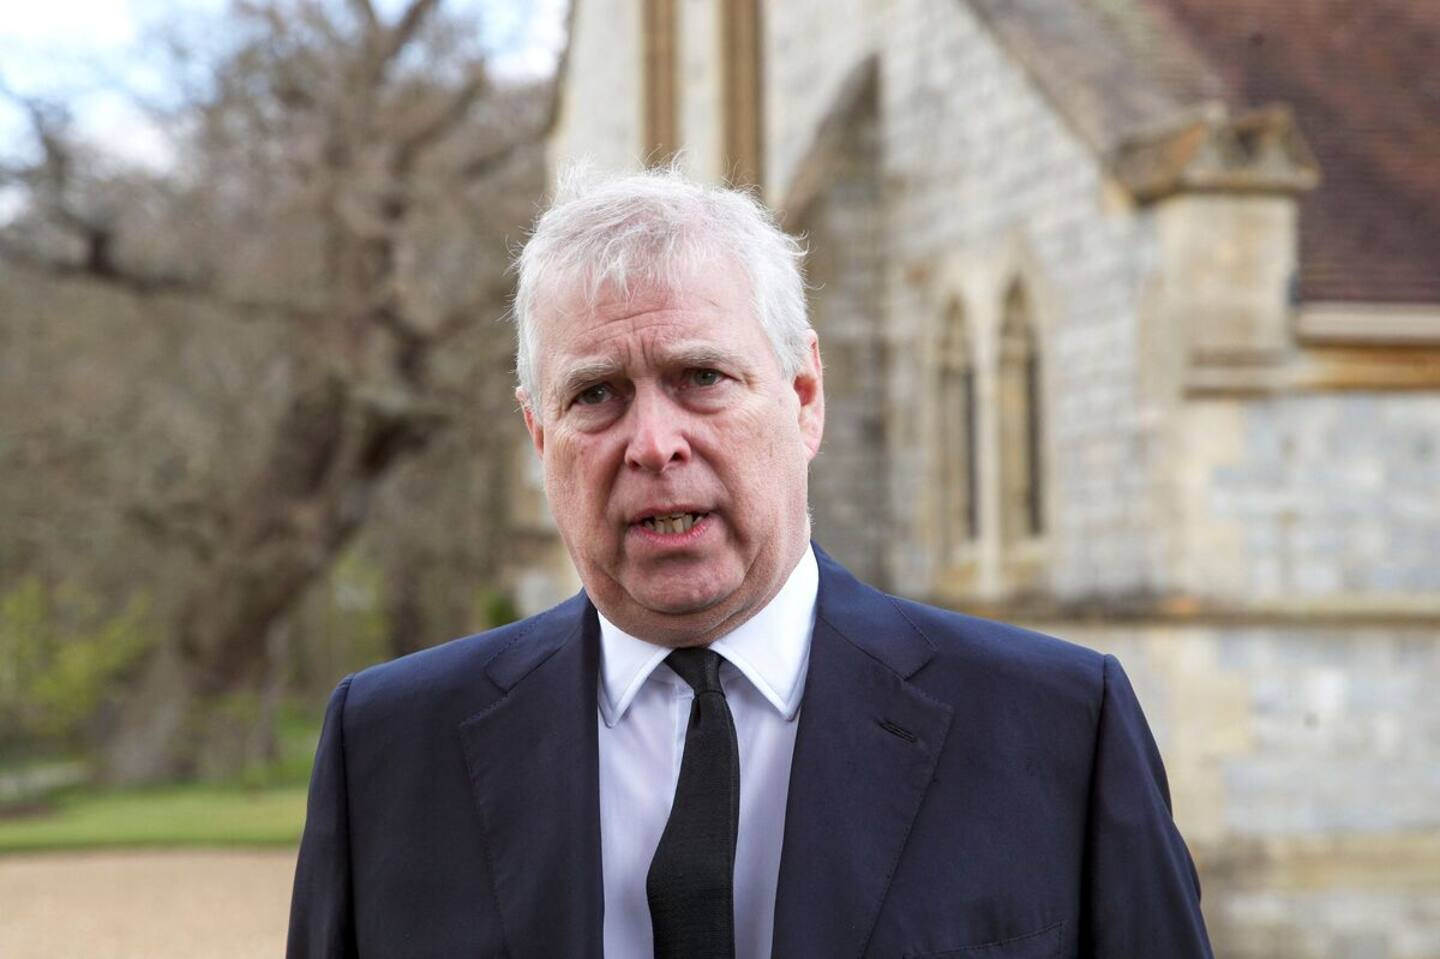 Prince Andrew deprived of the procession of the prestigious Order of the Garter